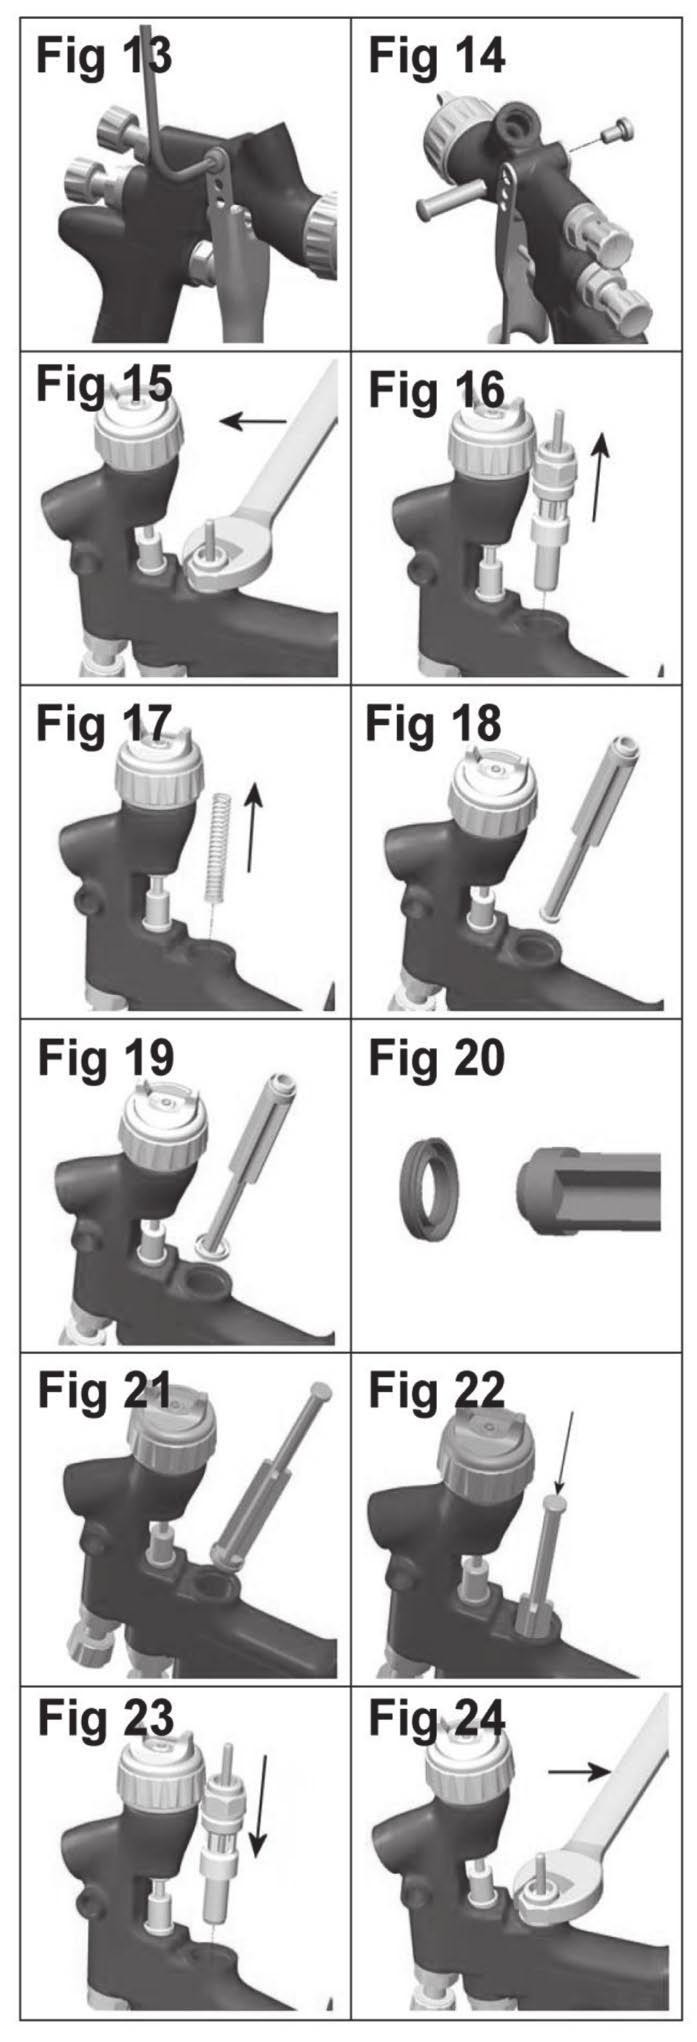 Page 10 Parts Replacement/Maintenance AIR VALVE INSTRUCTIONS Replacing Air Valve Reasons to replace air valve: A) Air leak through the gun. B) Air valve not operating correctly. 1. Remove trigger using TORX (T20) key provided in the kit.